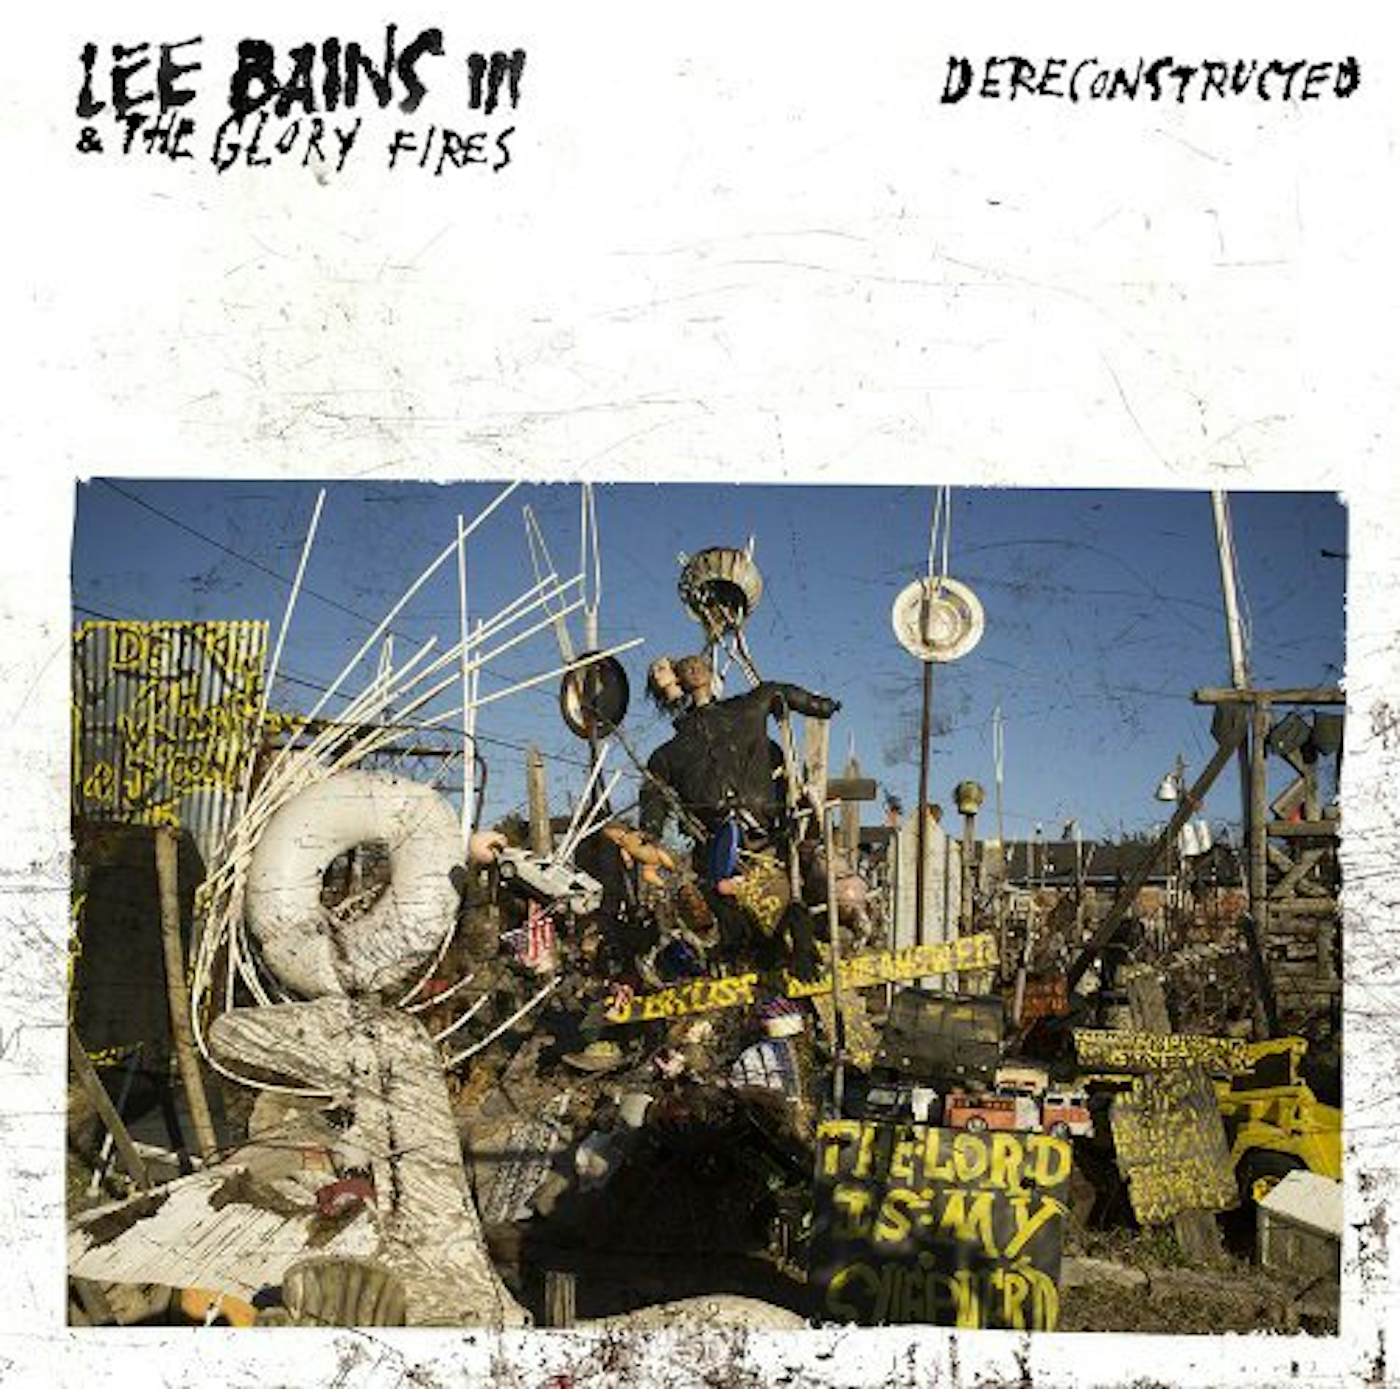 Lee Bains + The Glory Fires Dereconstructed Vinyl Record